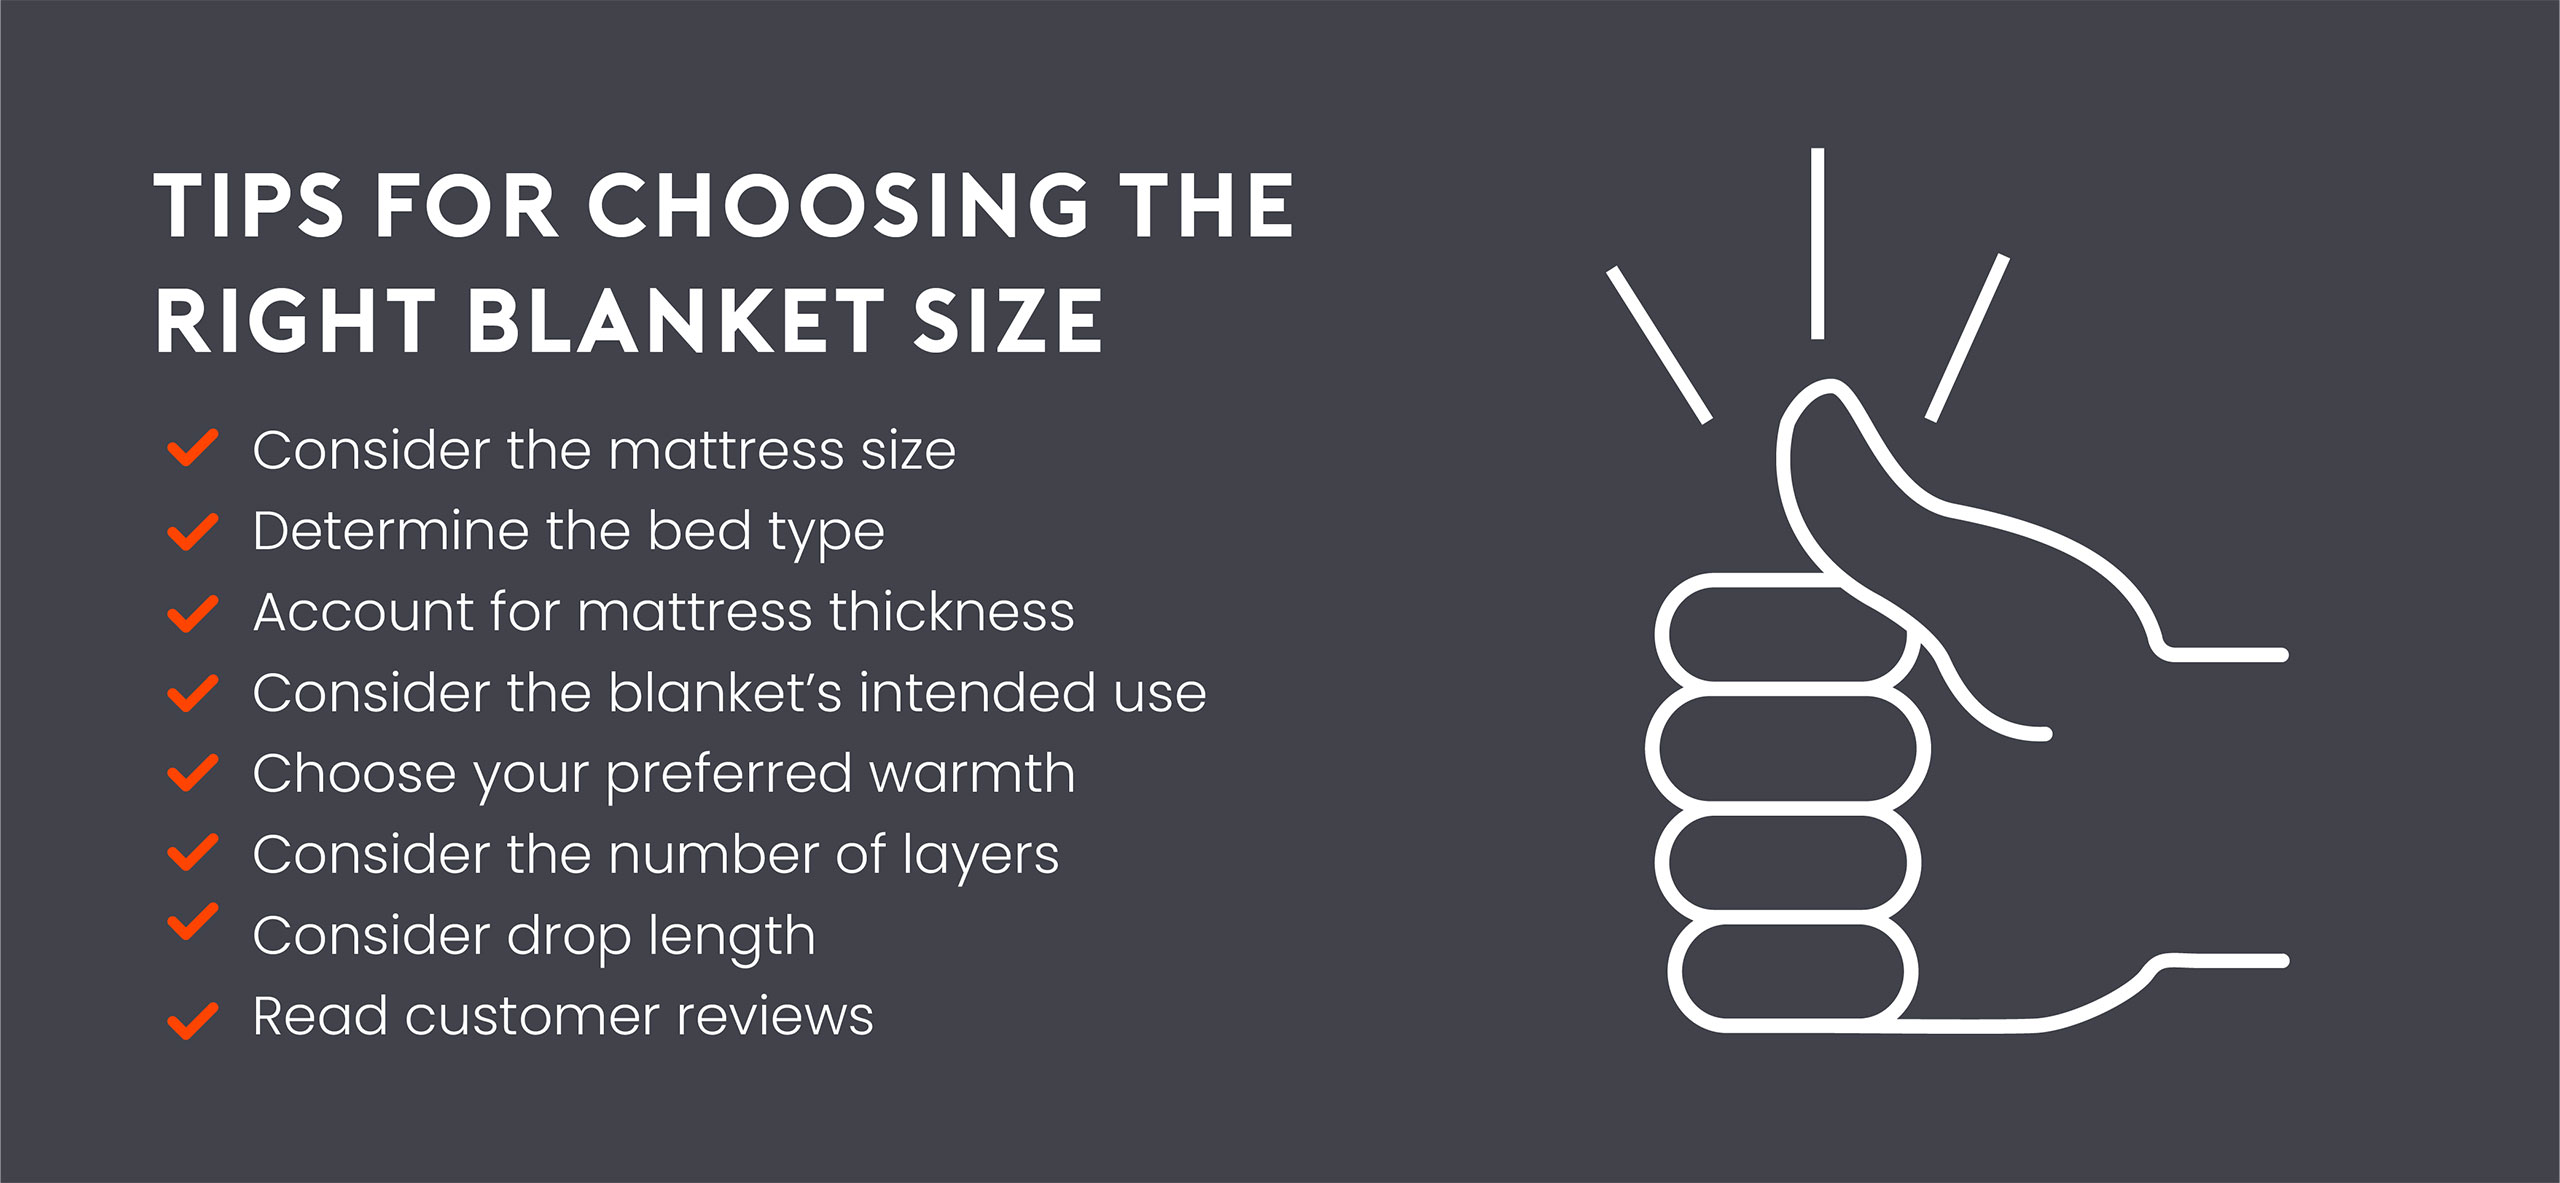 Tips for choosing the right blanket size